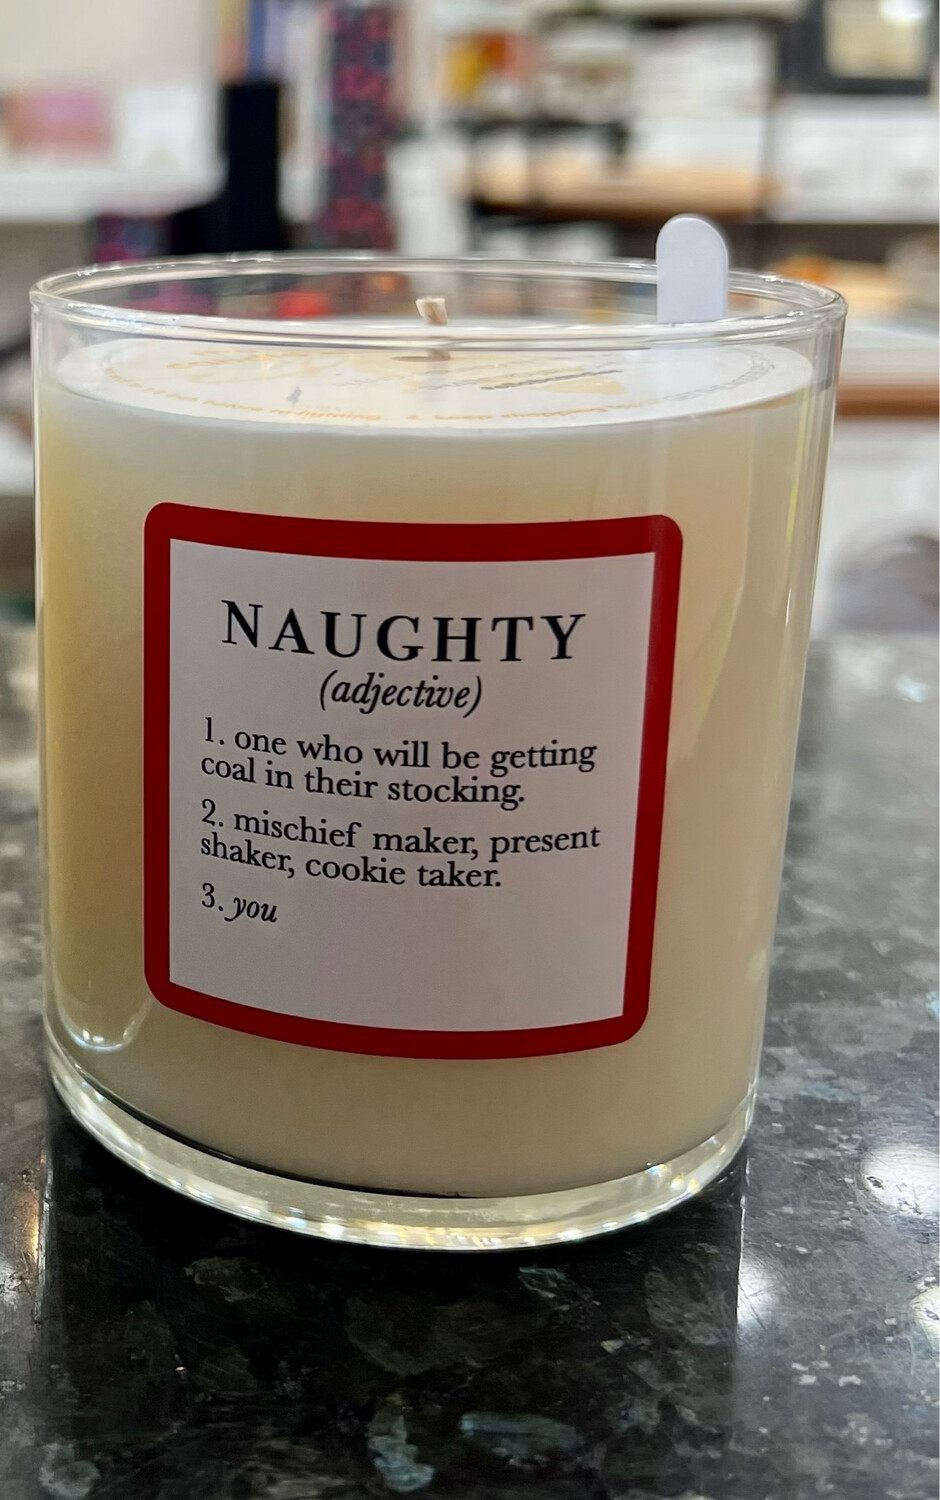 Limited edition Naughty 11oz candle